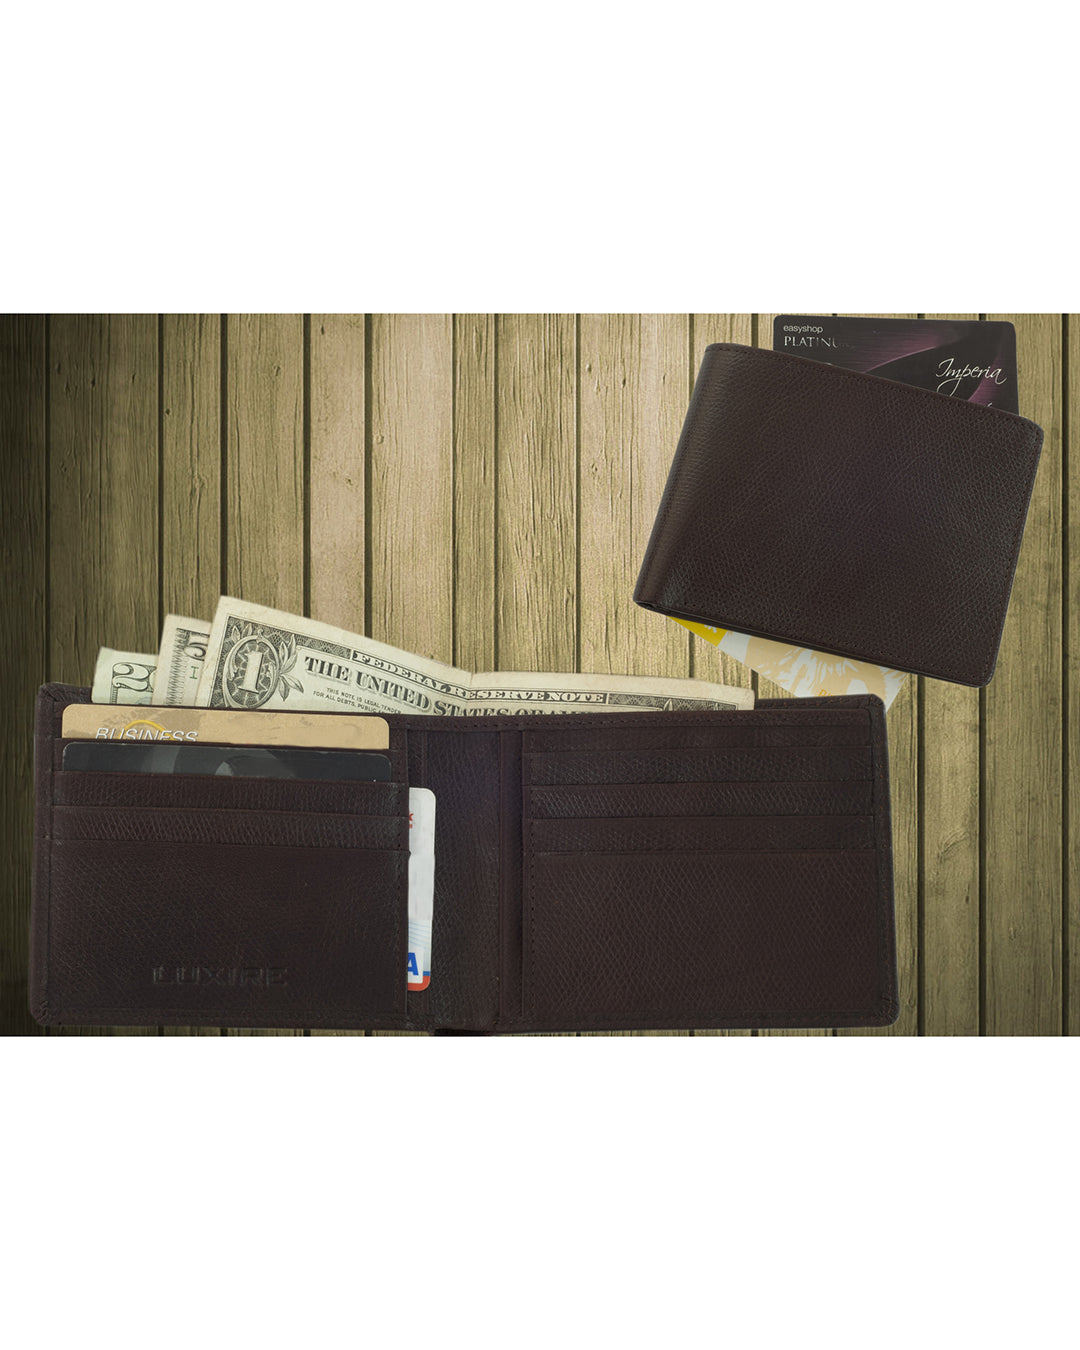 Luxire Leather Wallet